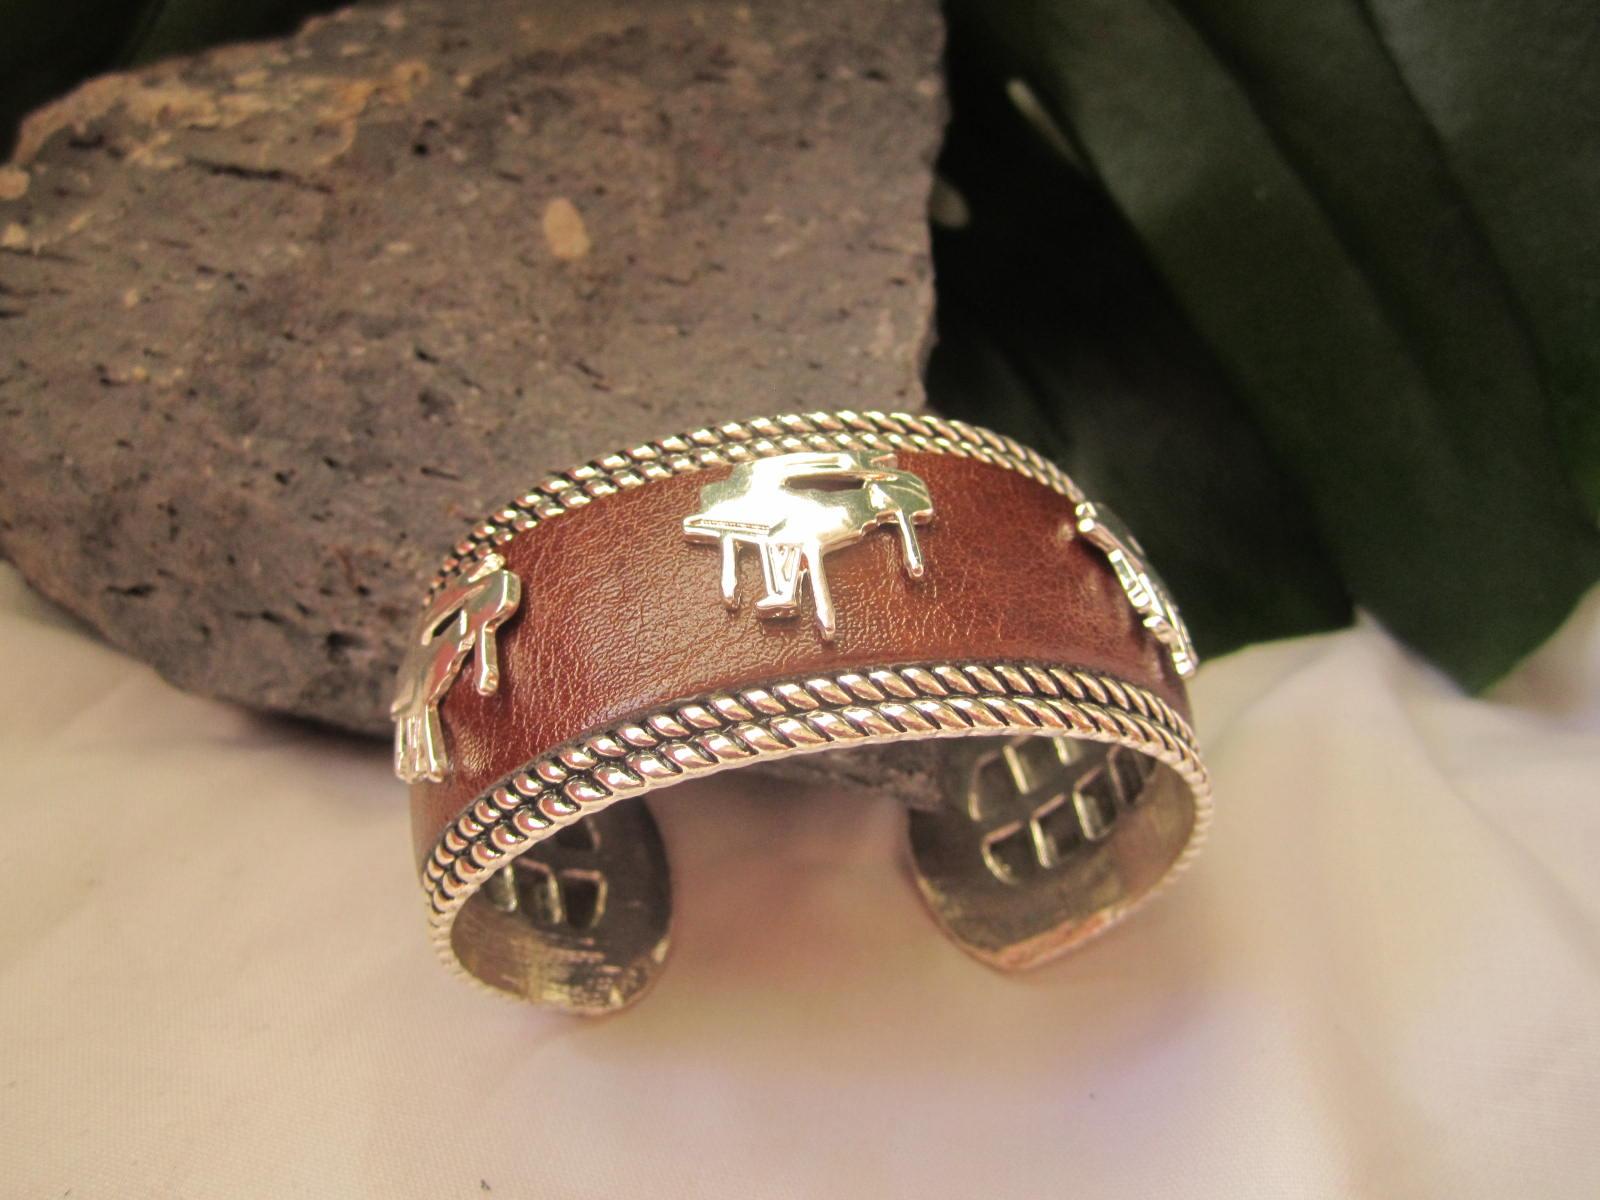 Silver Brown Leather Piano Cuff Bracelet